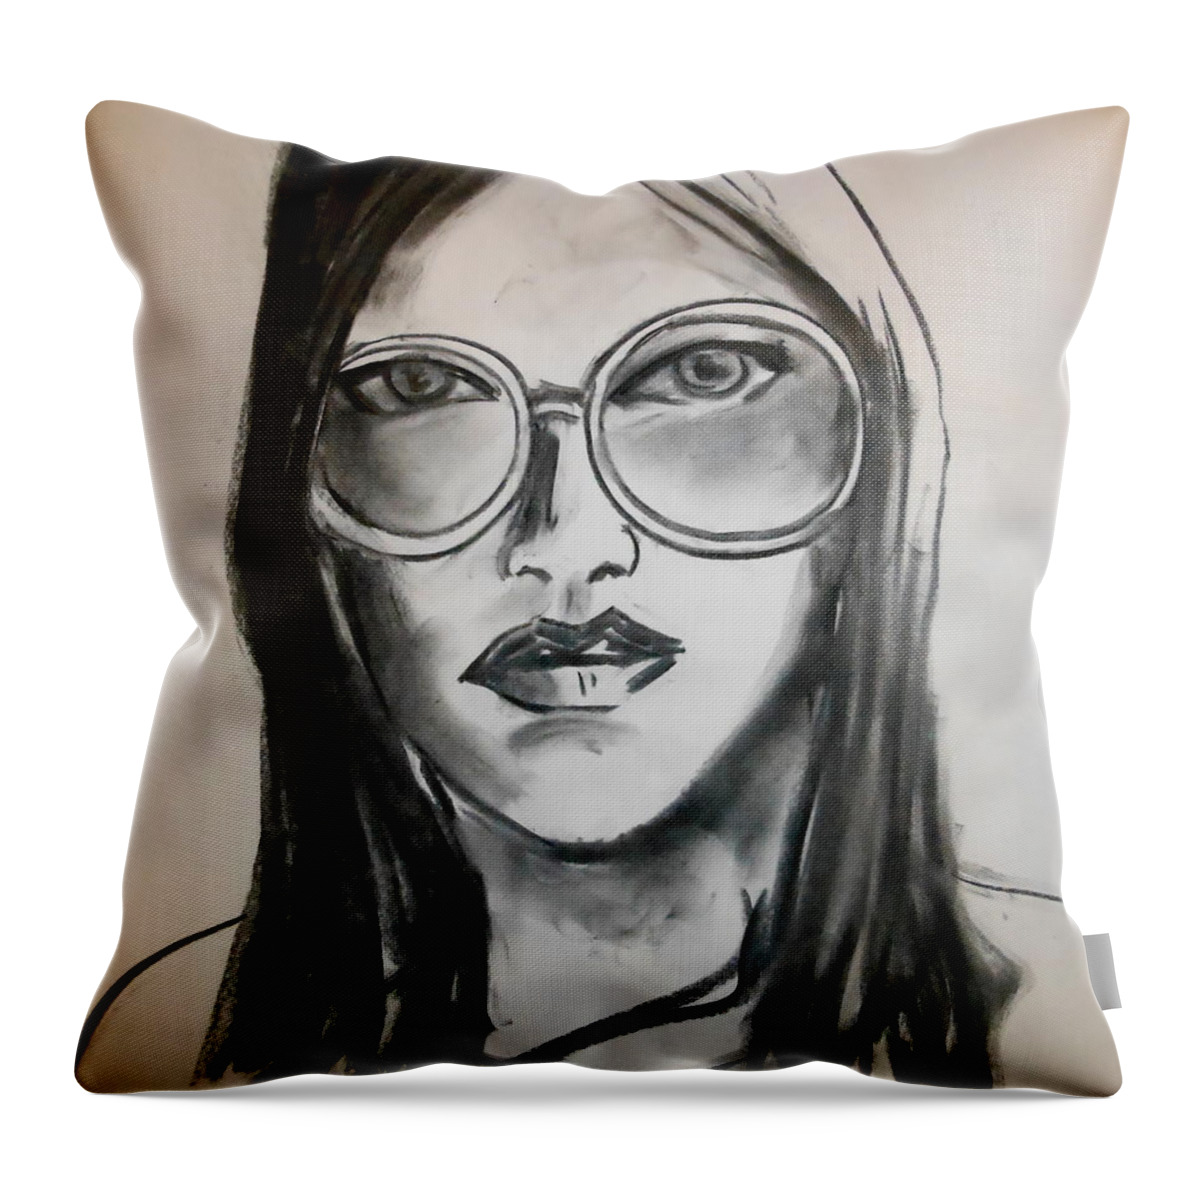 Charcoal Throw Pillow featuring the drawing Teacher's Aide by Jason Reinhardt